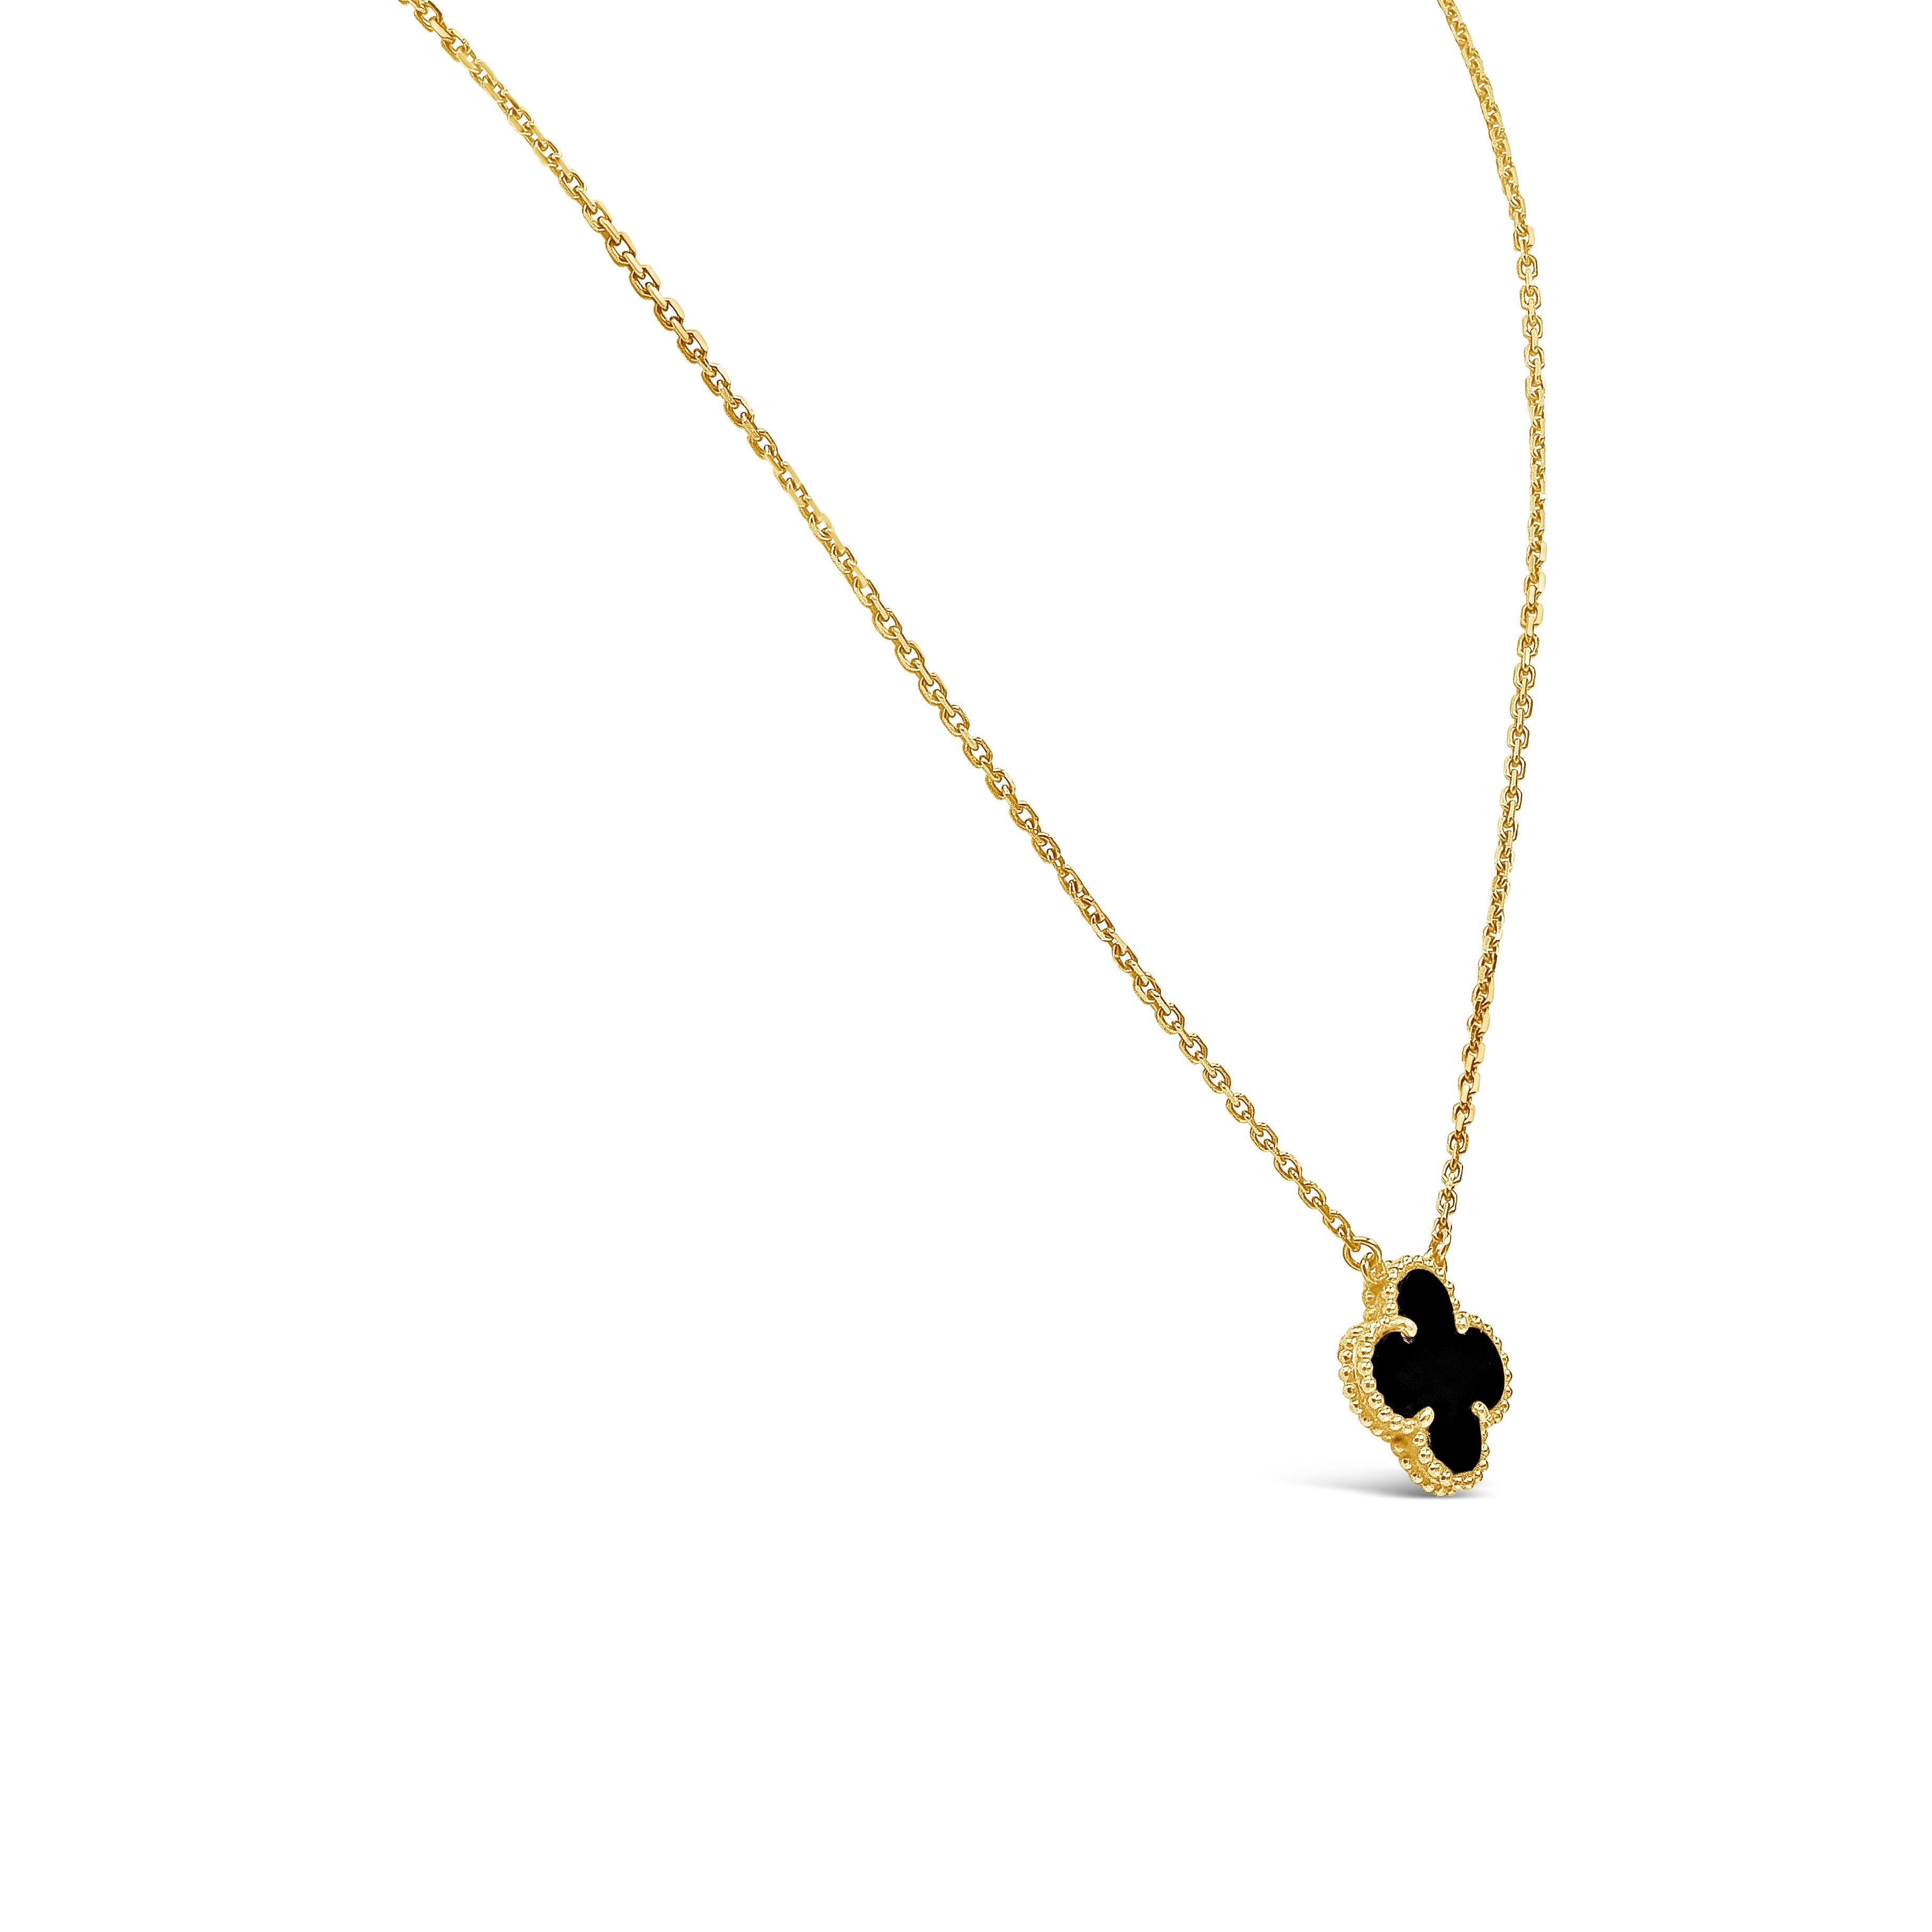 Original Alhambra pendant design made in 1968. Showcasing a four leaf clover motif pendant made of Onyx, set in a beaded mounting made in 18k yellow gold. Suspended on an original Van Cleef & Arpels yellow gold chain measuring 16 inches in length.